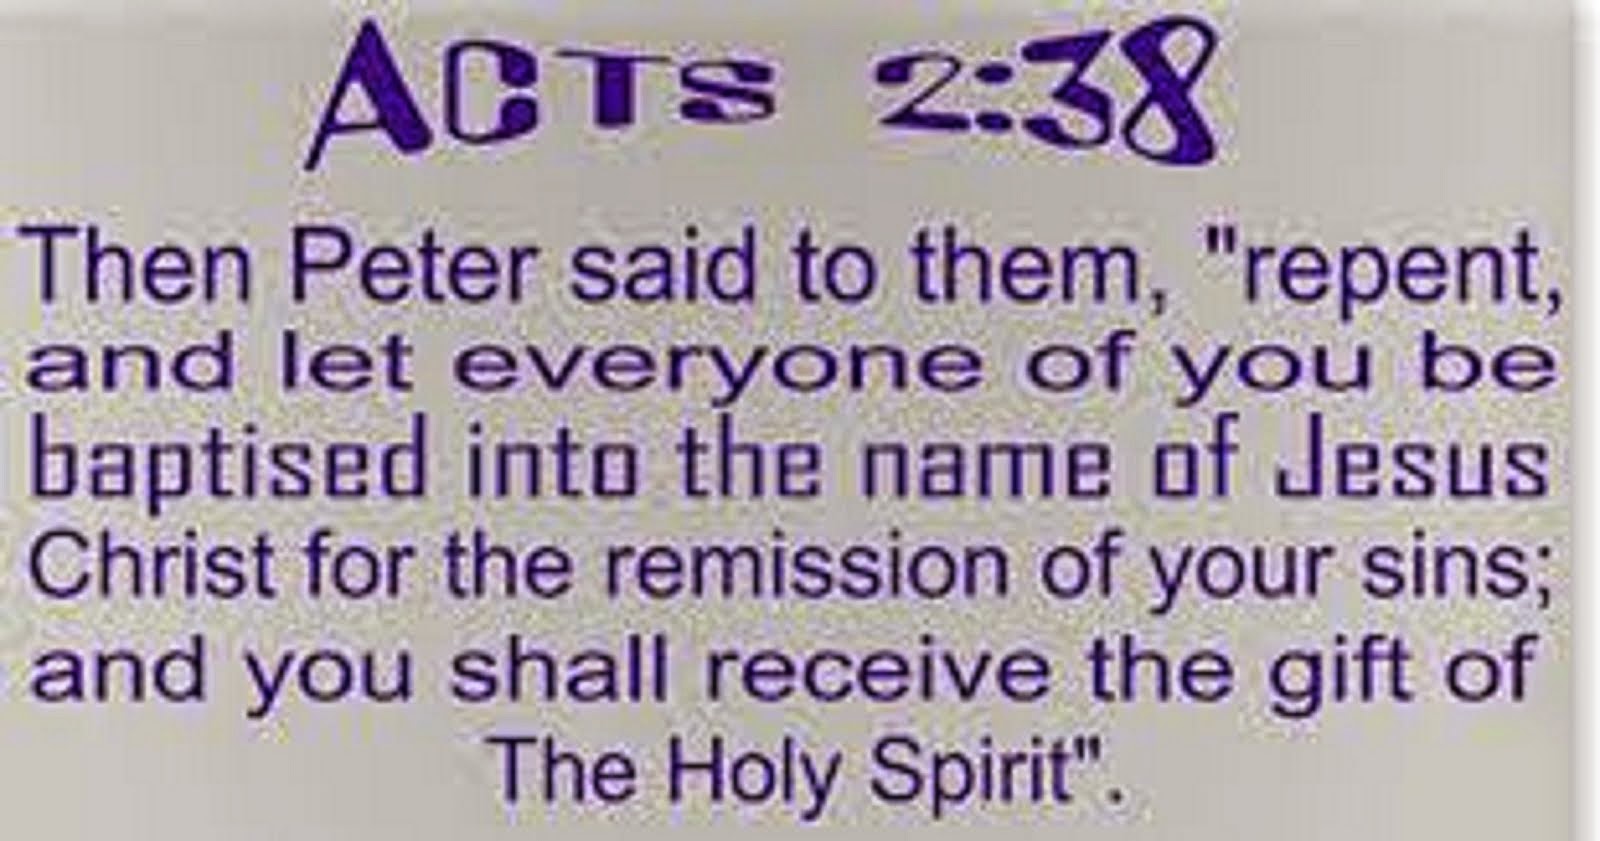 ACTS 2: 38  REPENT AND BE BAPTIZED